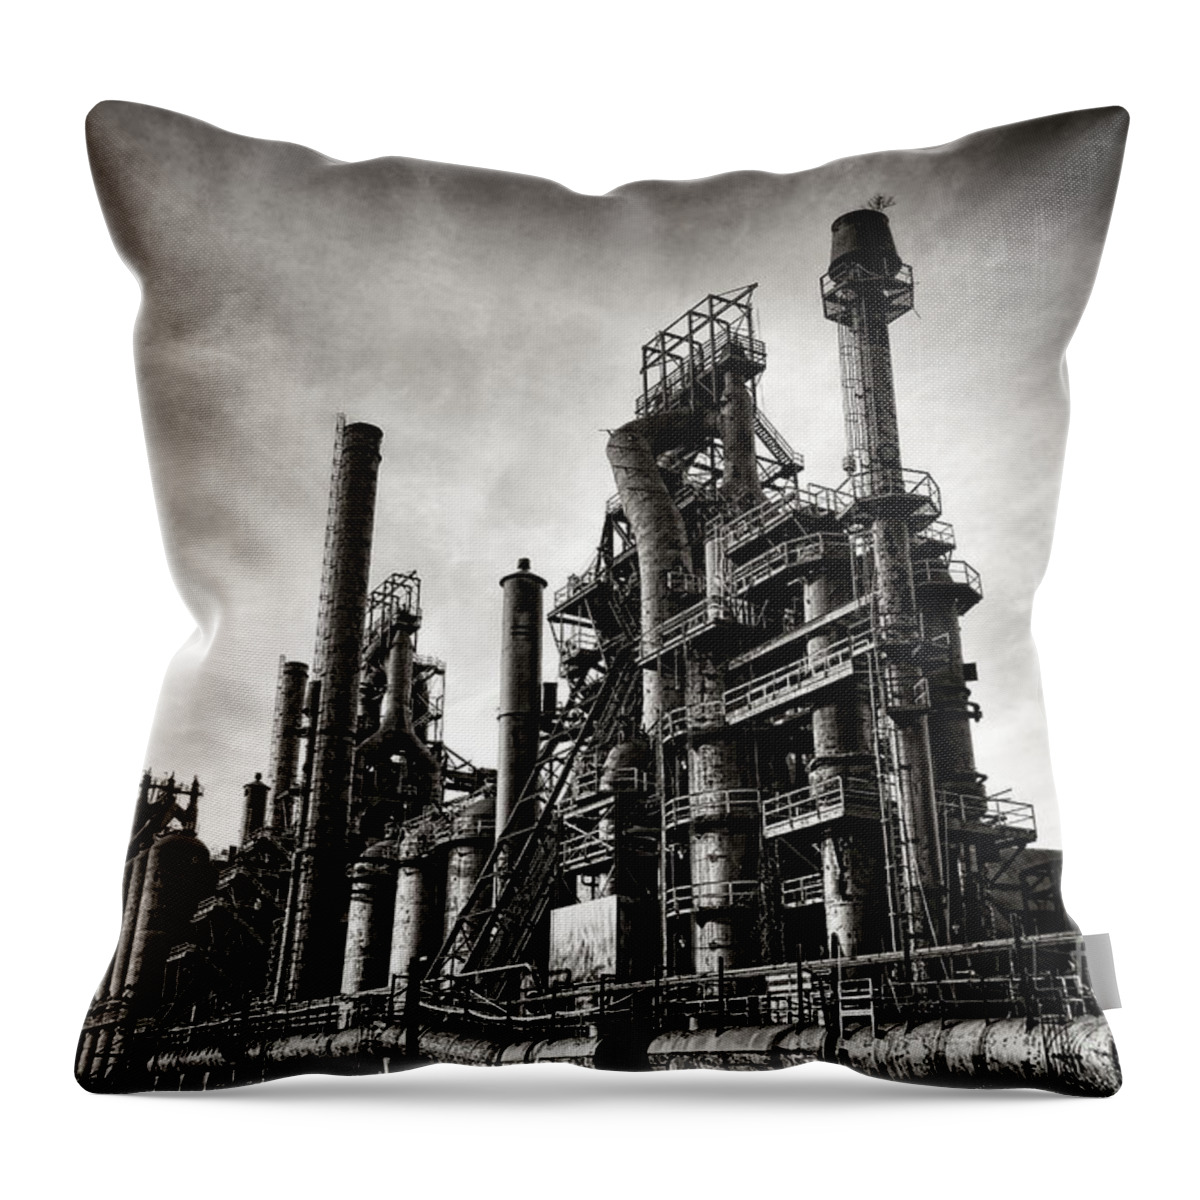 Bethlehem Throw Pillow featuring the photograph Bethlehem Steel by Olivier Le Queinec